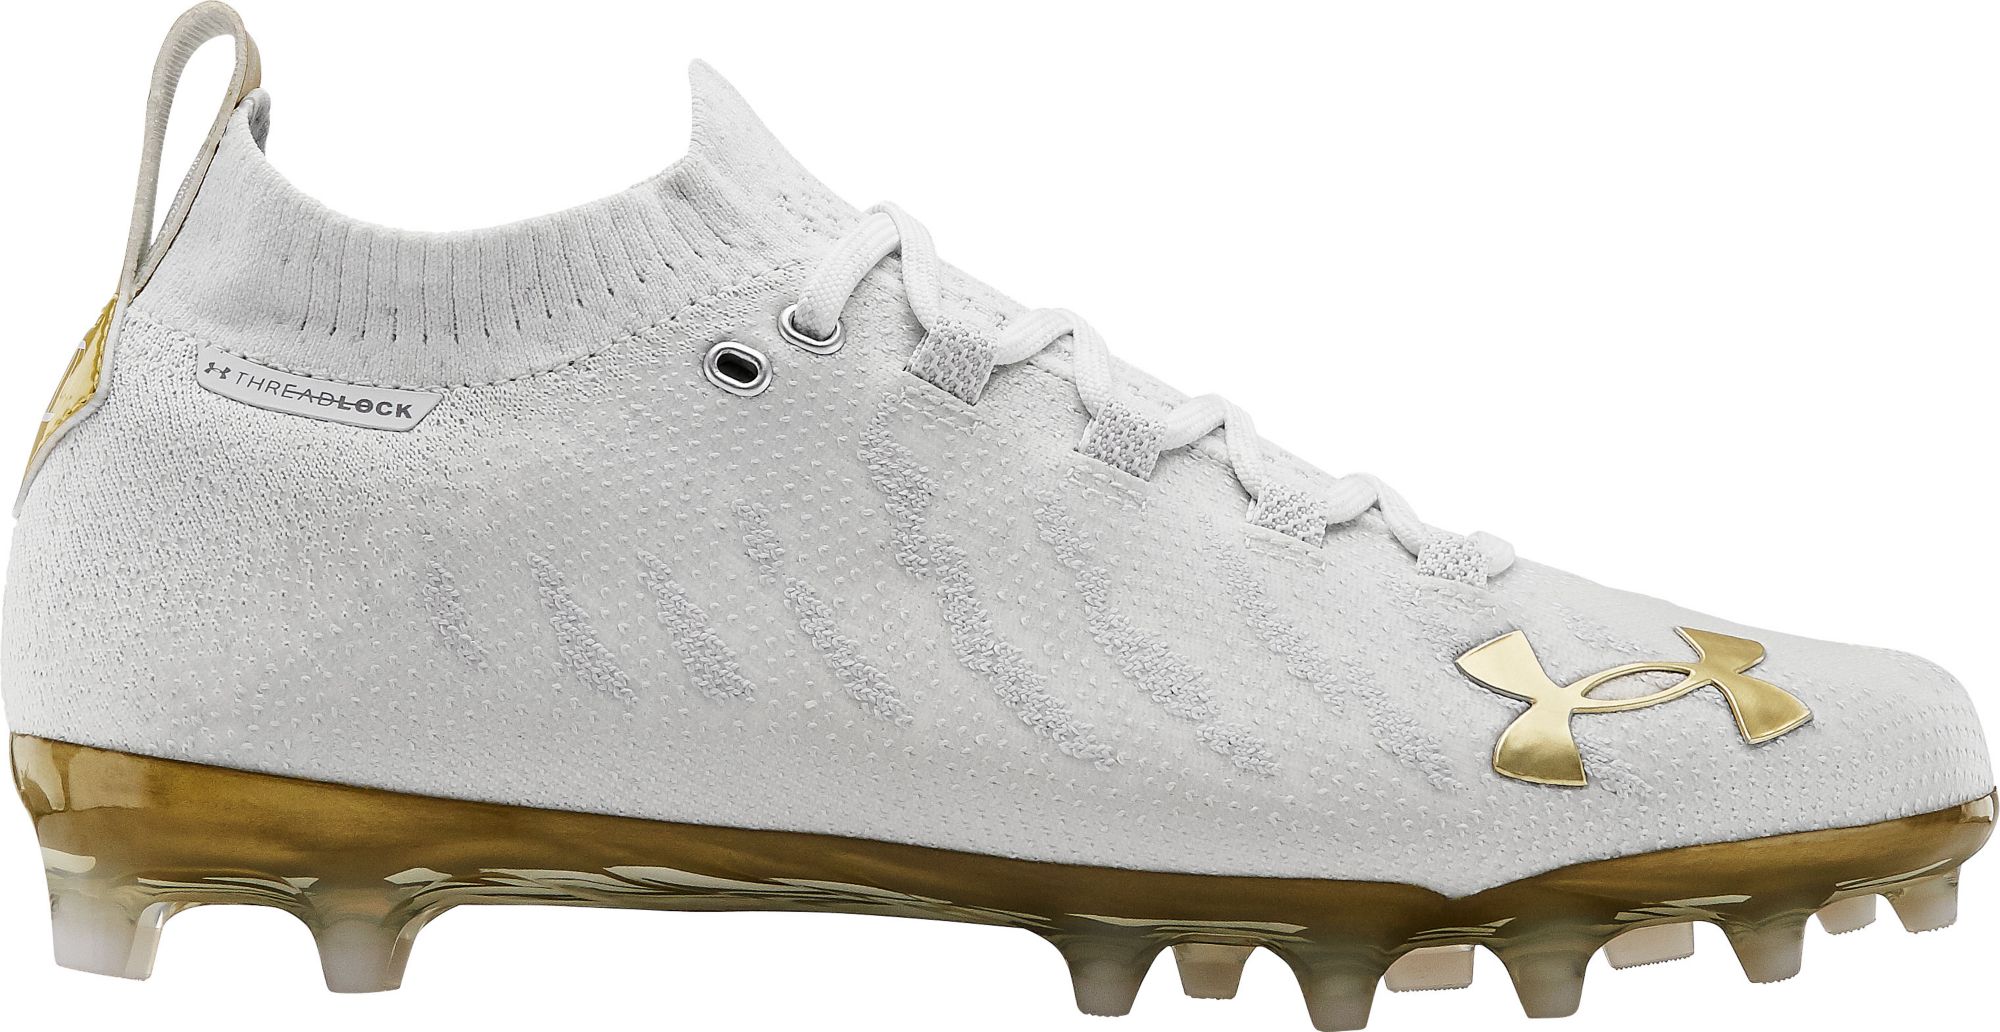 White Under Armour Football Cleats 